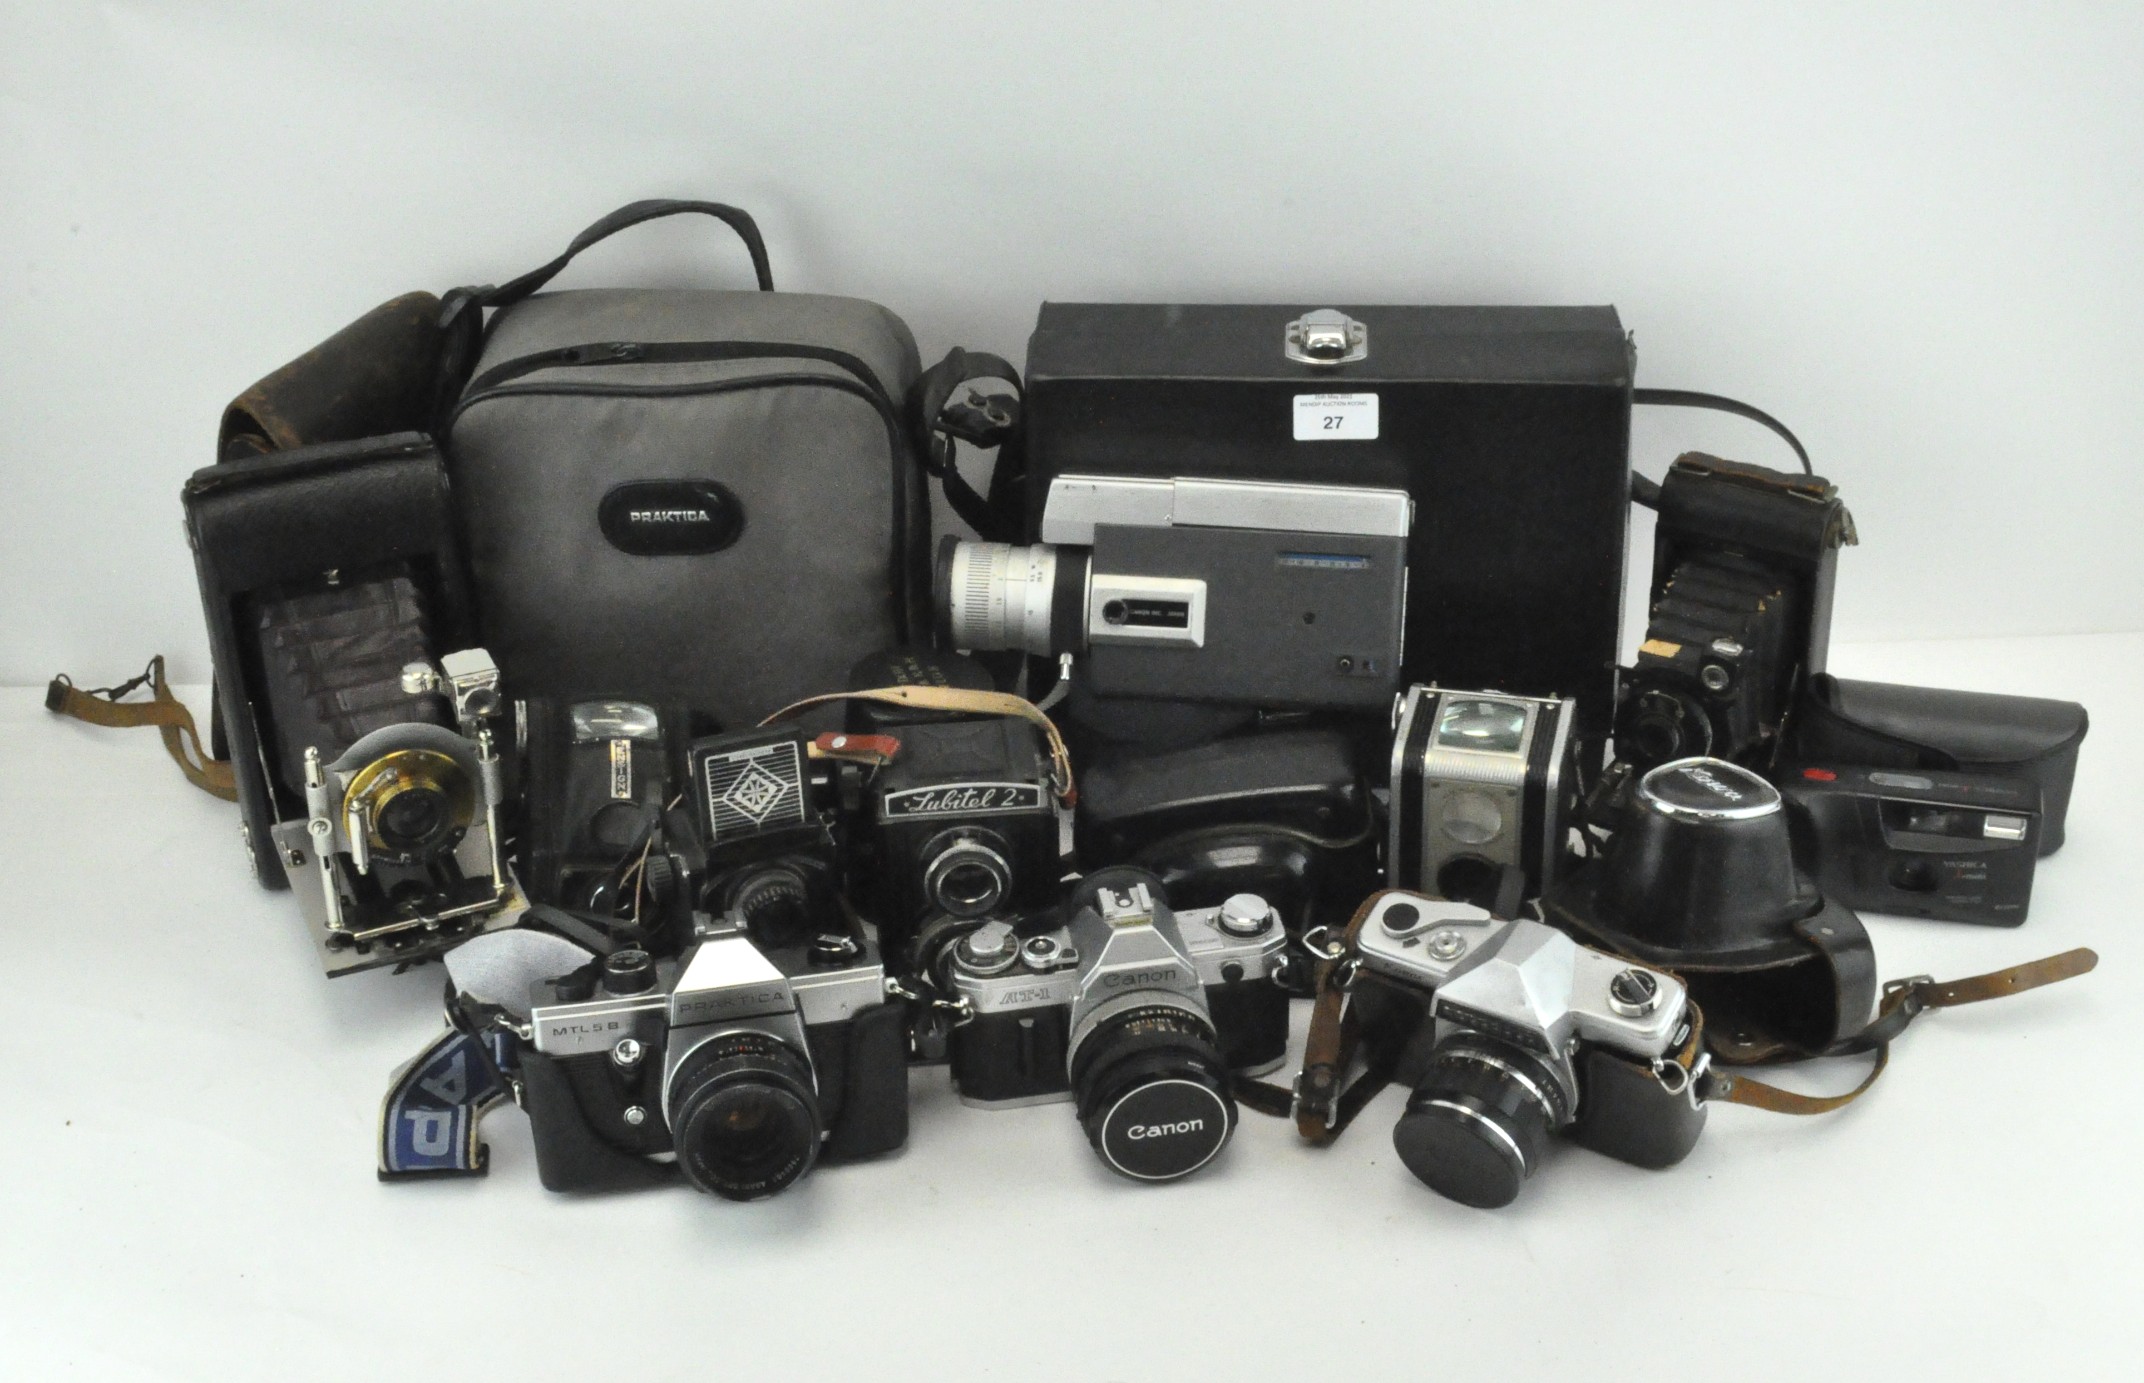 A Canon AT-! slr camera, a Lubitel 2 twin lens reflex example, 2 folding cameras and related items